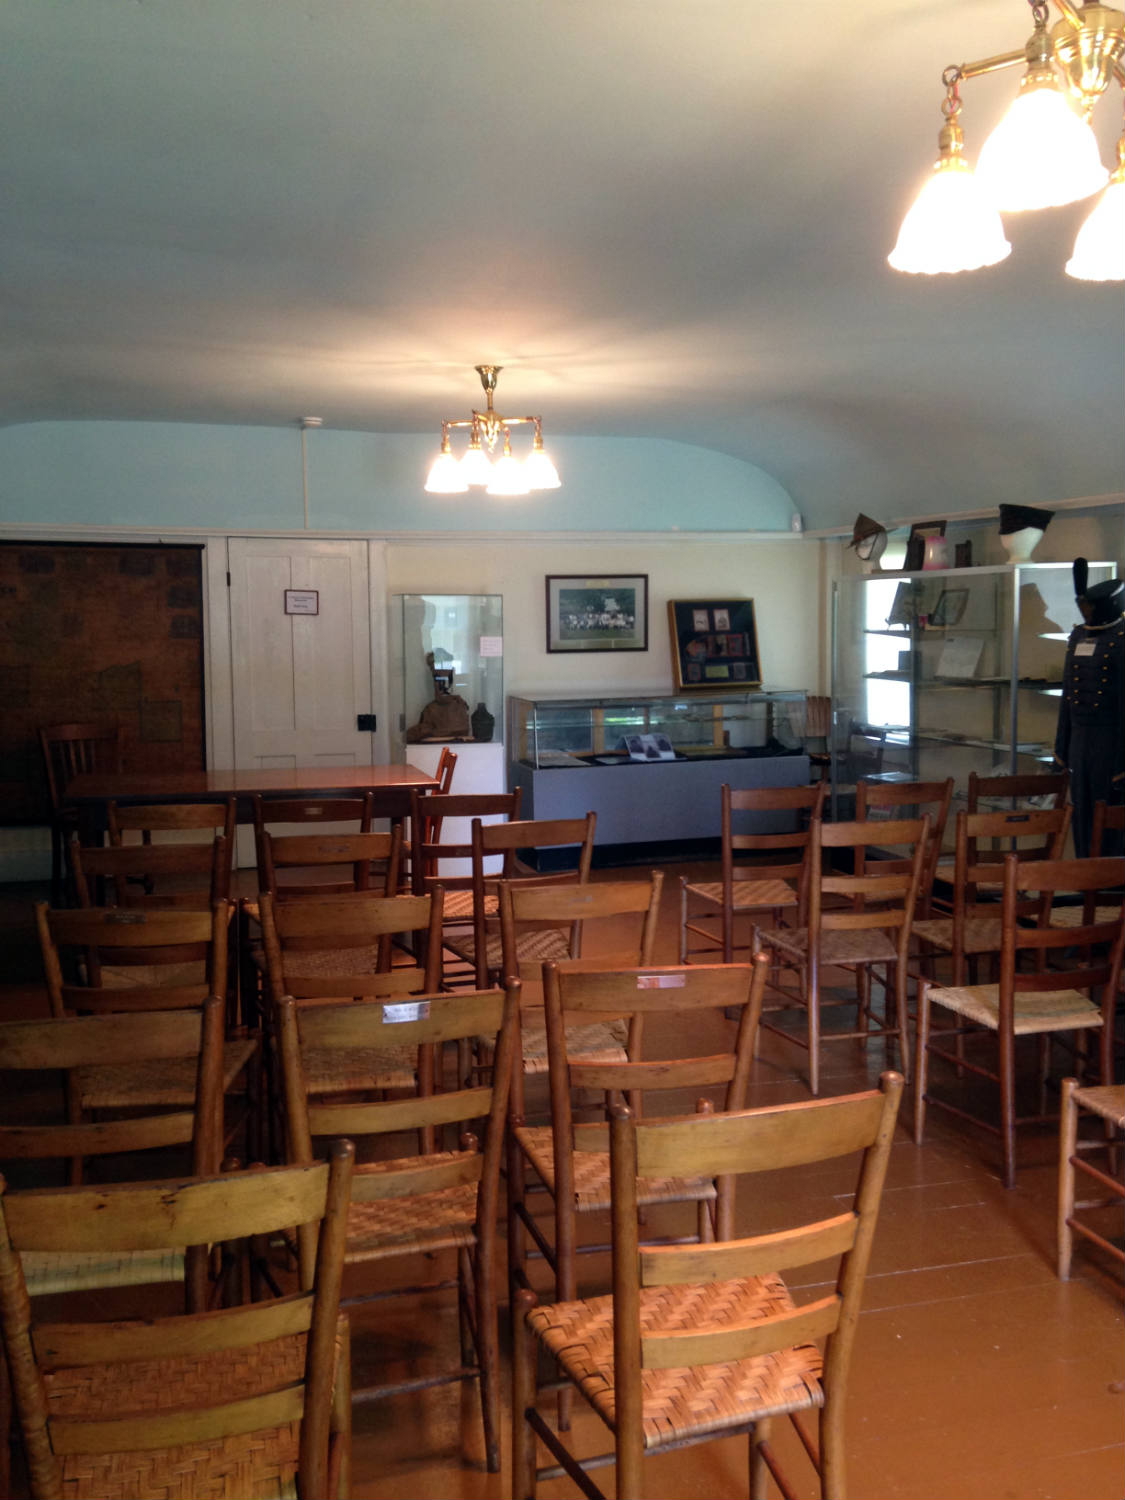 Inside of Baptist Meeting House in Ontario, NY